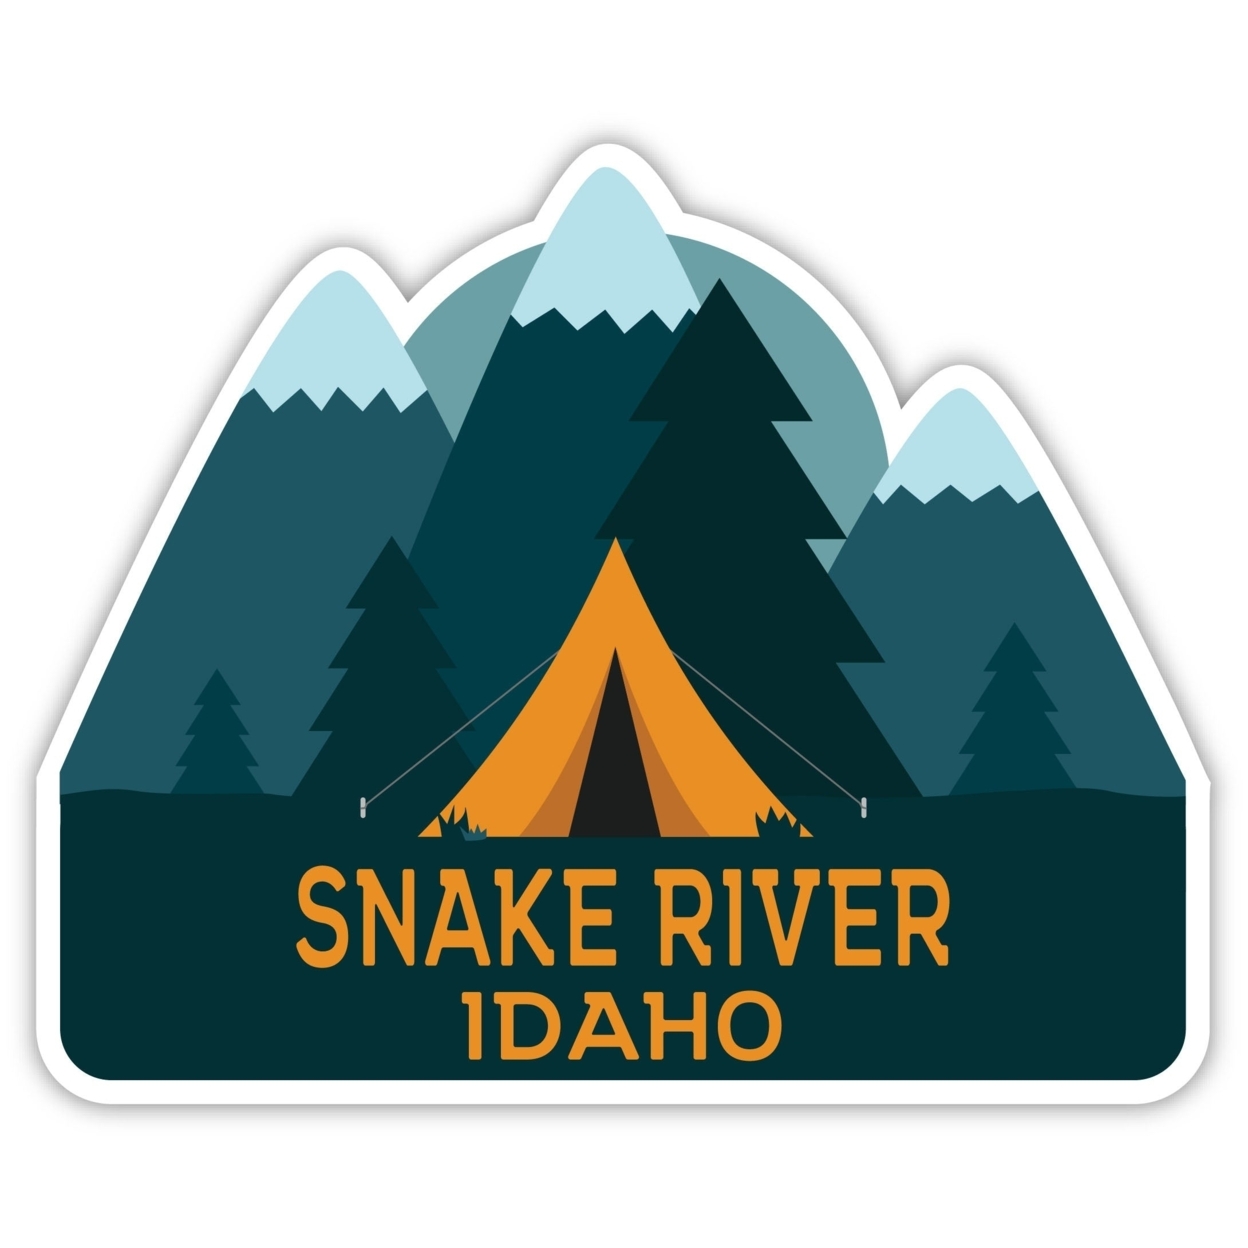 Snake River Idaho Souvenir Decorative Stickers (Choose Theme And Size) - Single Unit, 2-Inch, Great Outdoors